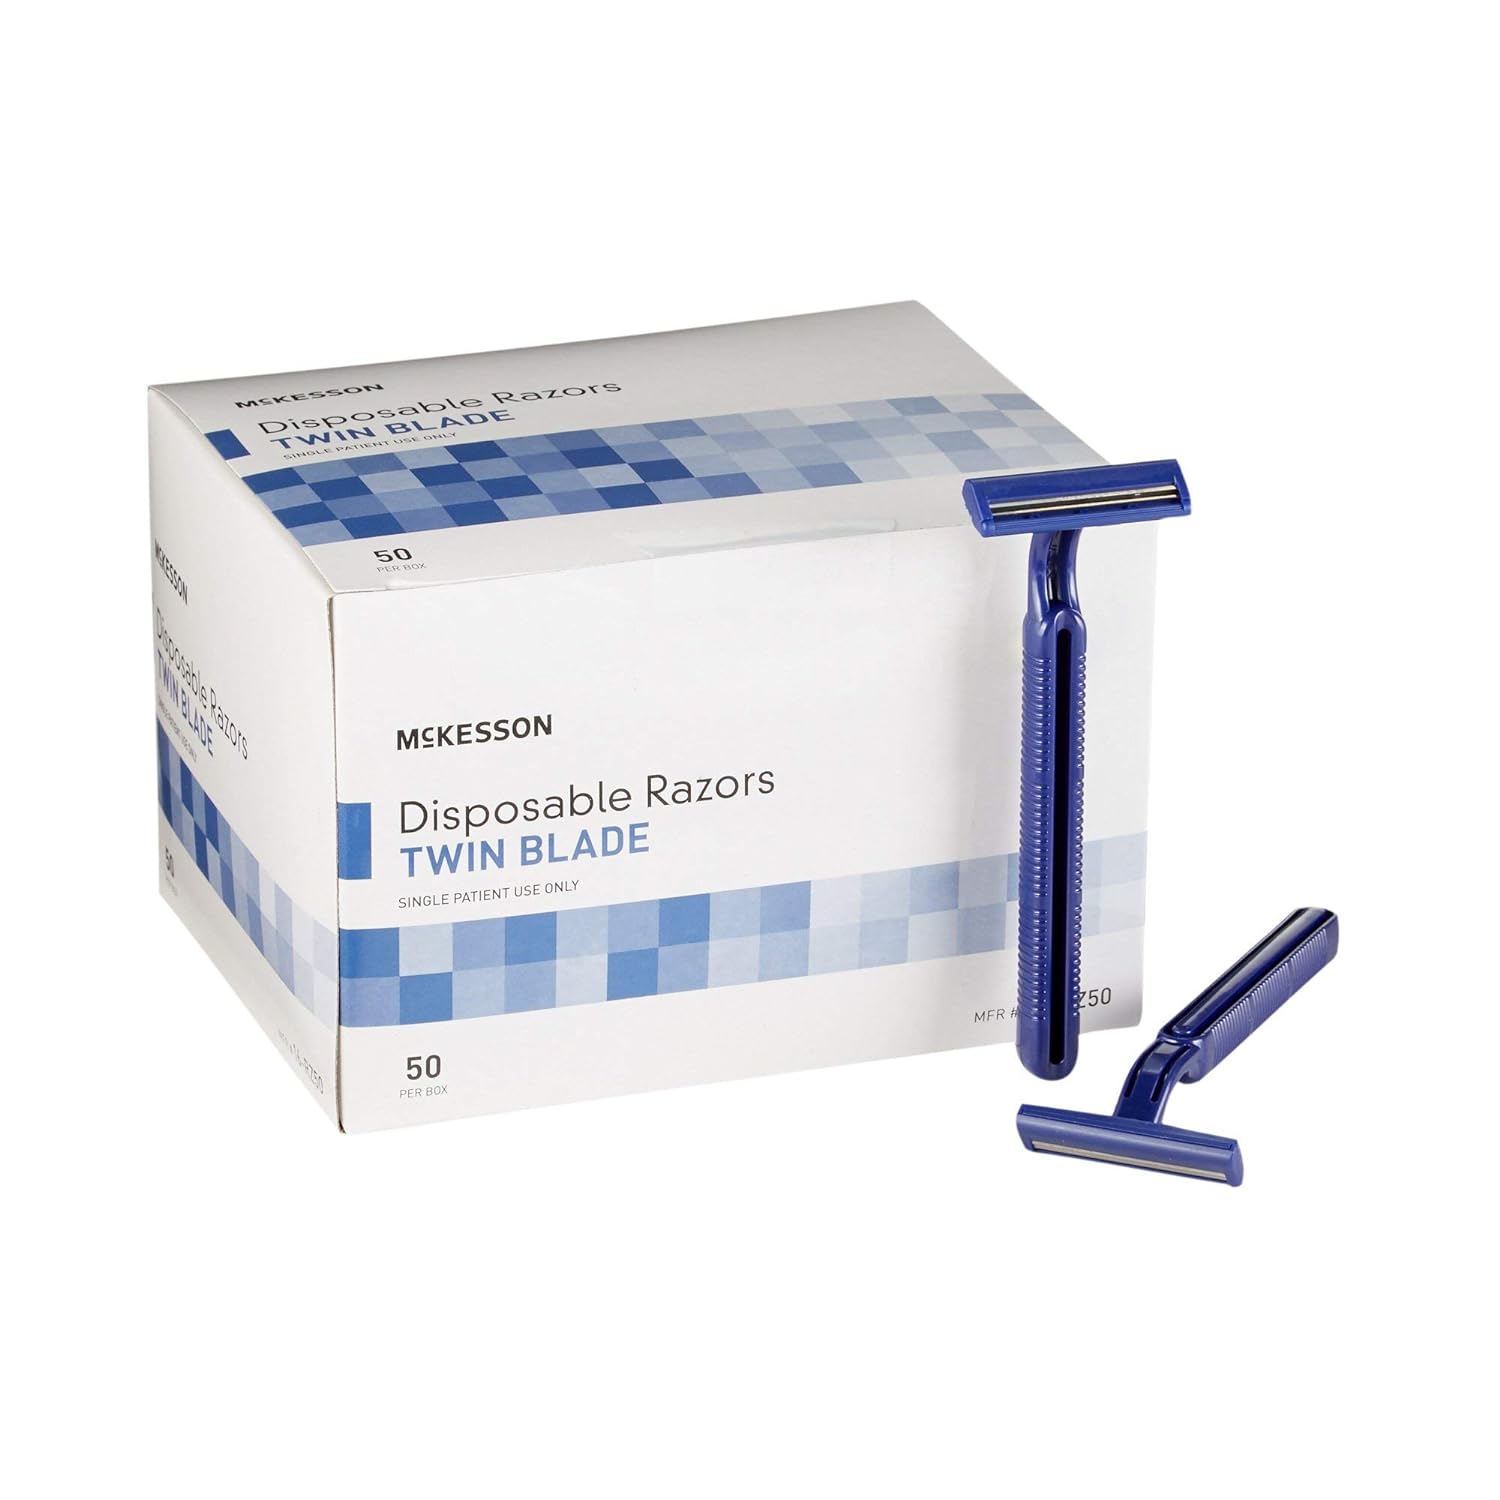 McKesson Disposable Razors, Shaving Razor, Twin Blade, Stainless Steel Blade, Blue, 50 Count, 1 Pack